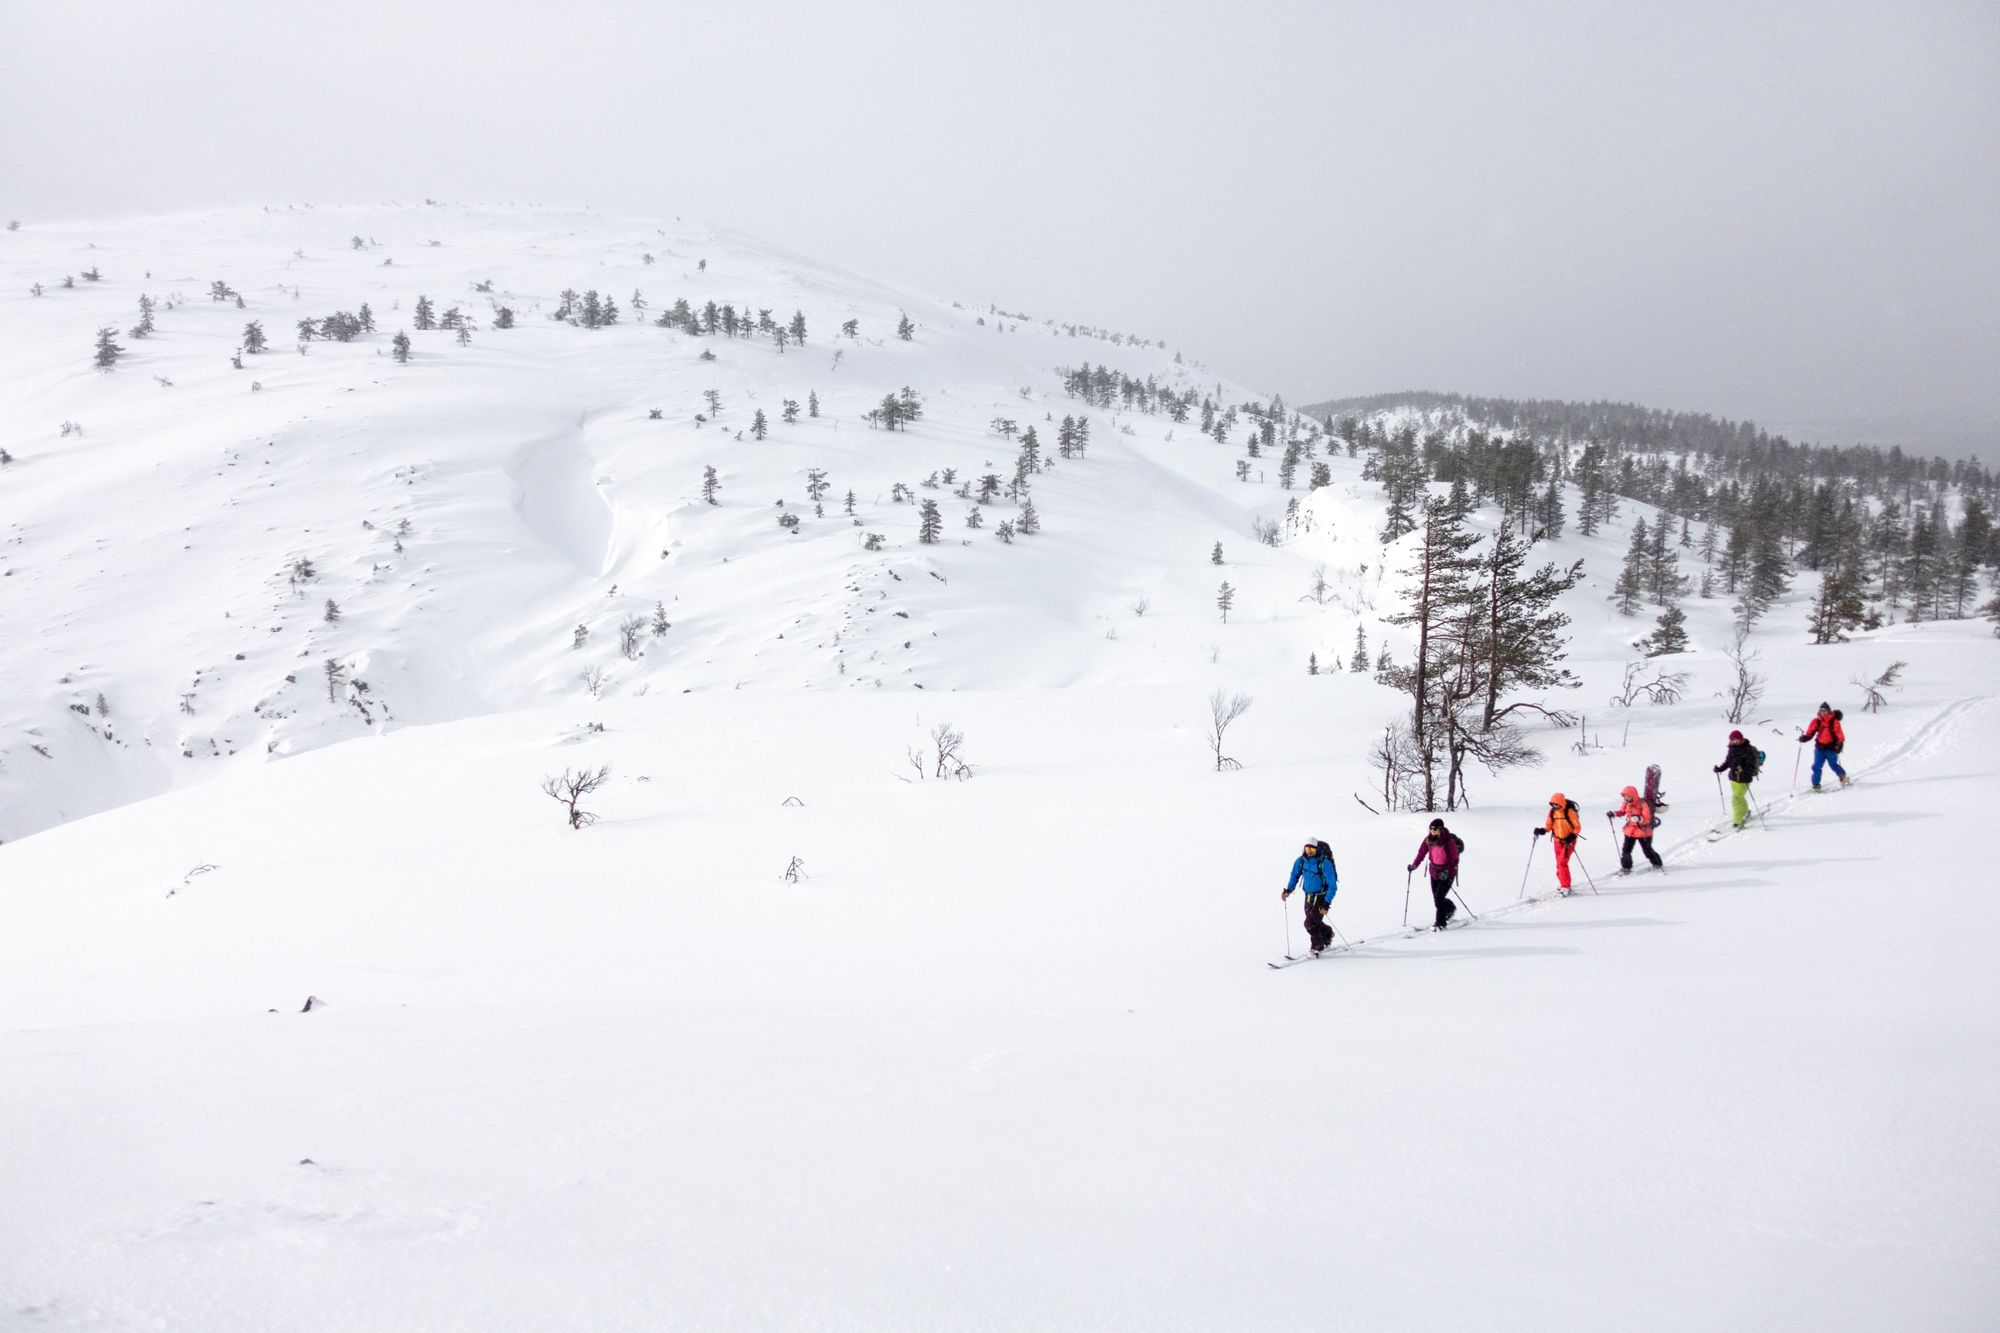 Nordic skiing makes it possible to access remote winter landscapes, like this view in Finnish Lapland. Photo: Hendrik Morkel/Unsplash